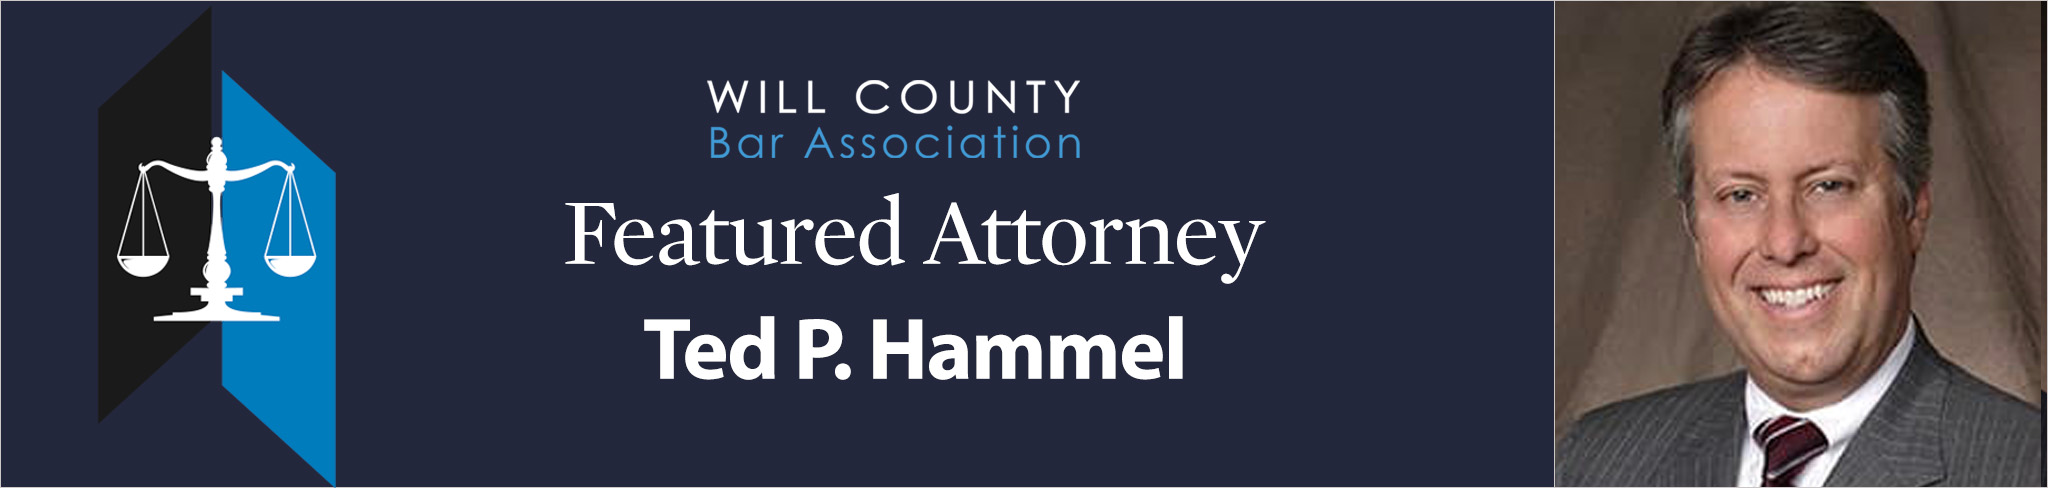 Will County Bar Association Featured Attorney Ted P. Hammel